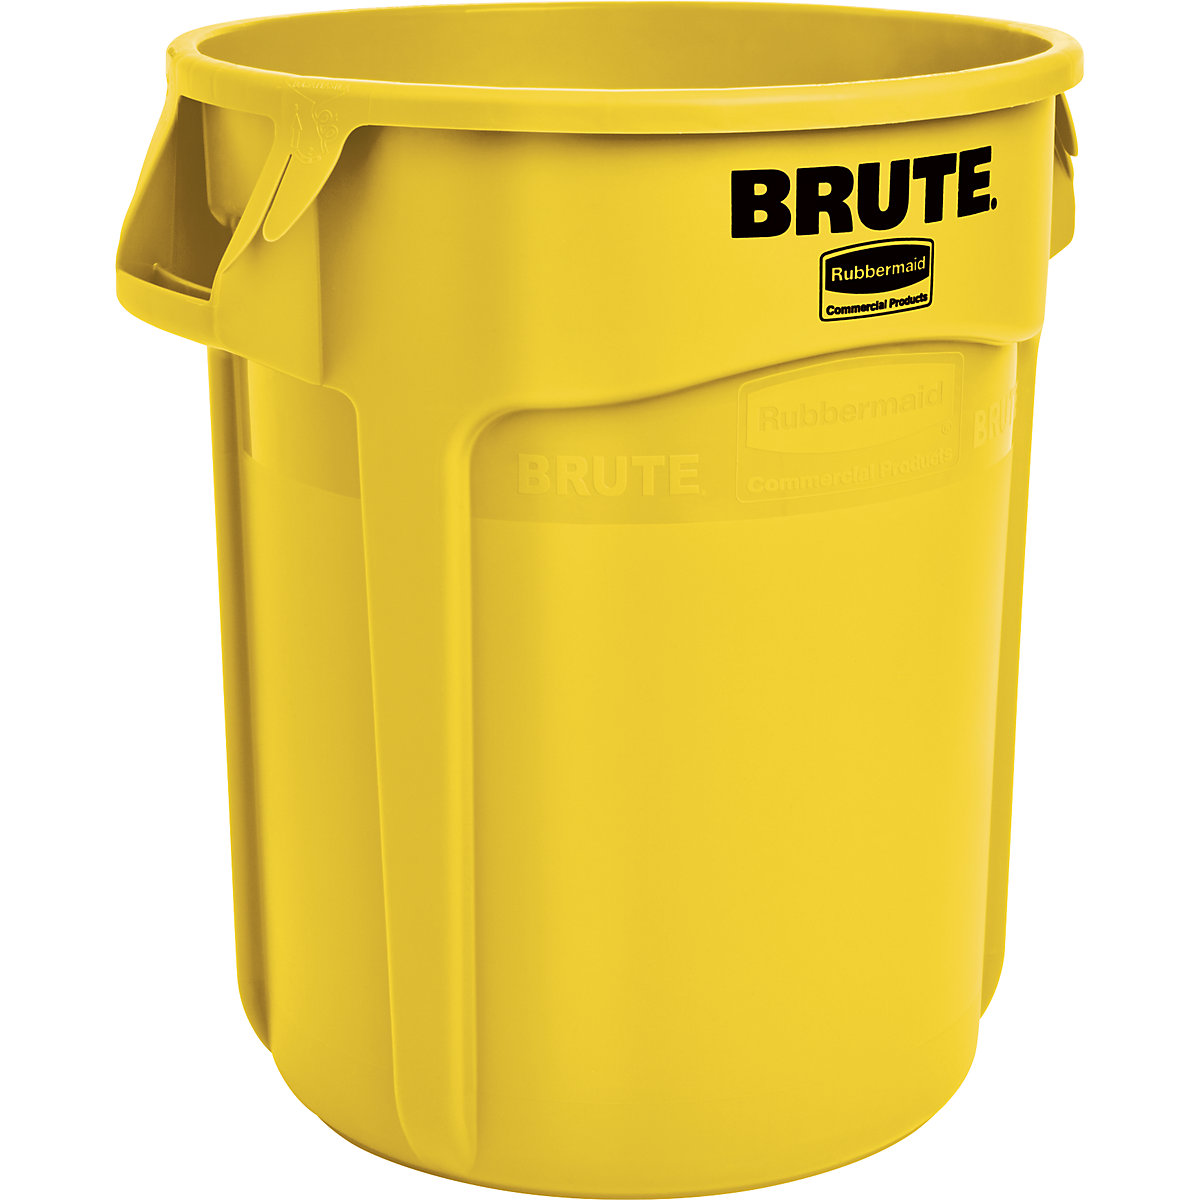 BRUTE® universal container, round – Rubbermaid, capacity 75 l, yellow-9